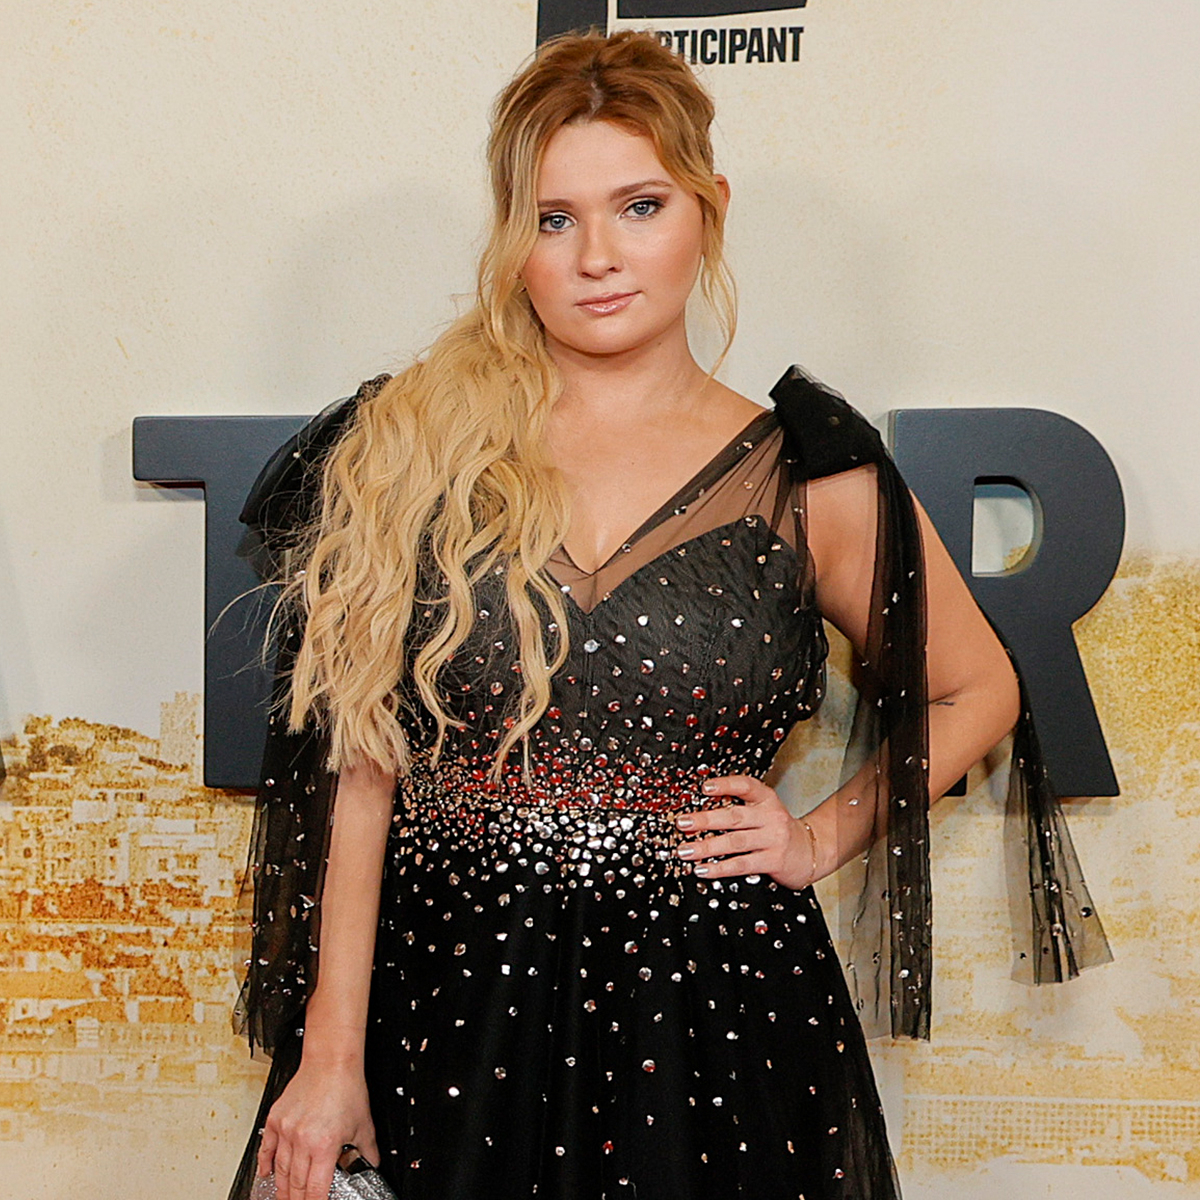 Abigail Breslin Adult Videos - Abigail Breslin Opens Up About Past Abusive Relationship - E! Online - CA